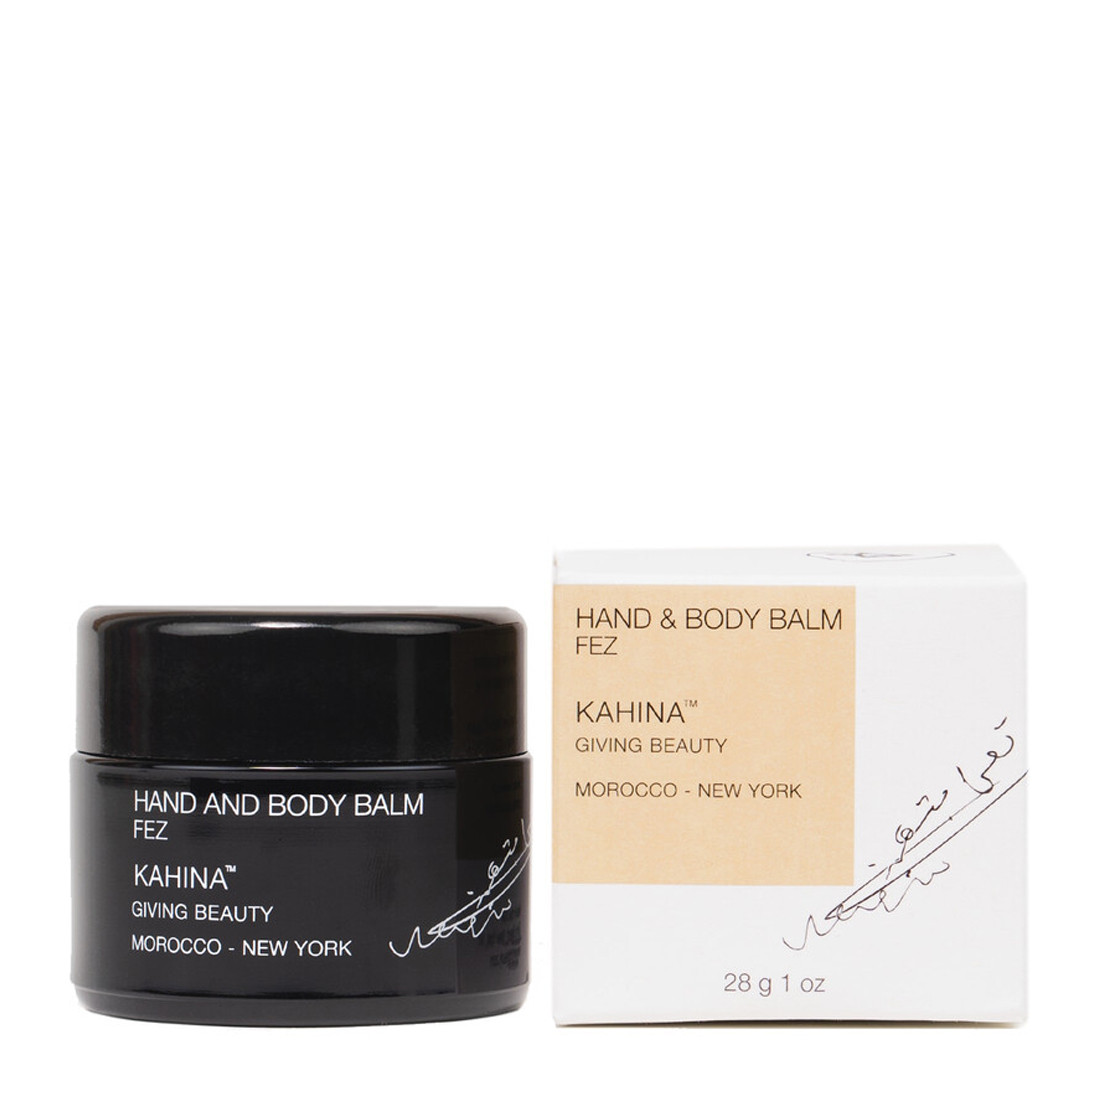 Kahina Giving Beauty Fez Hand And Body Balm Бальзам для рук и тела